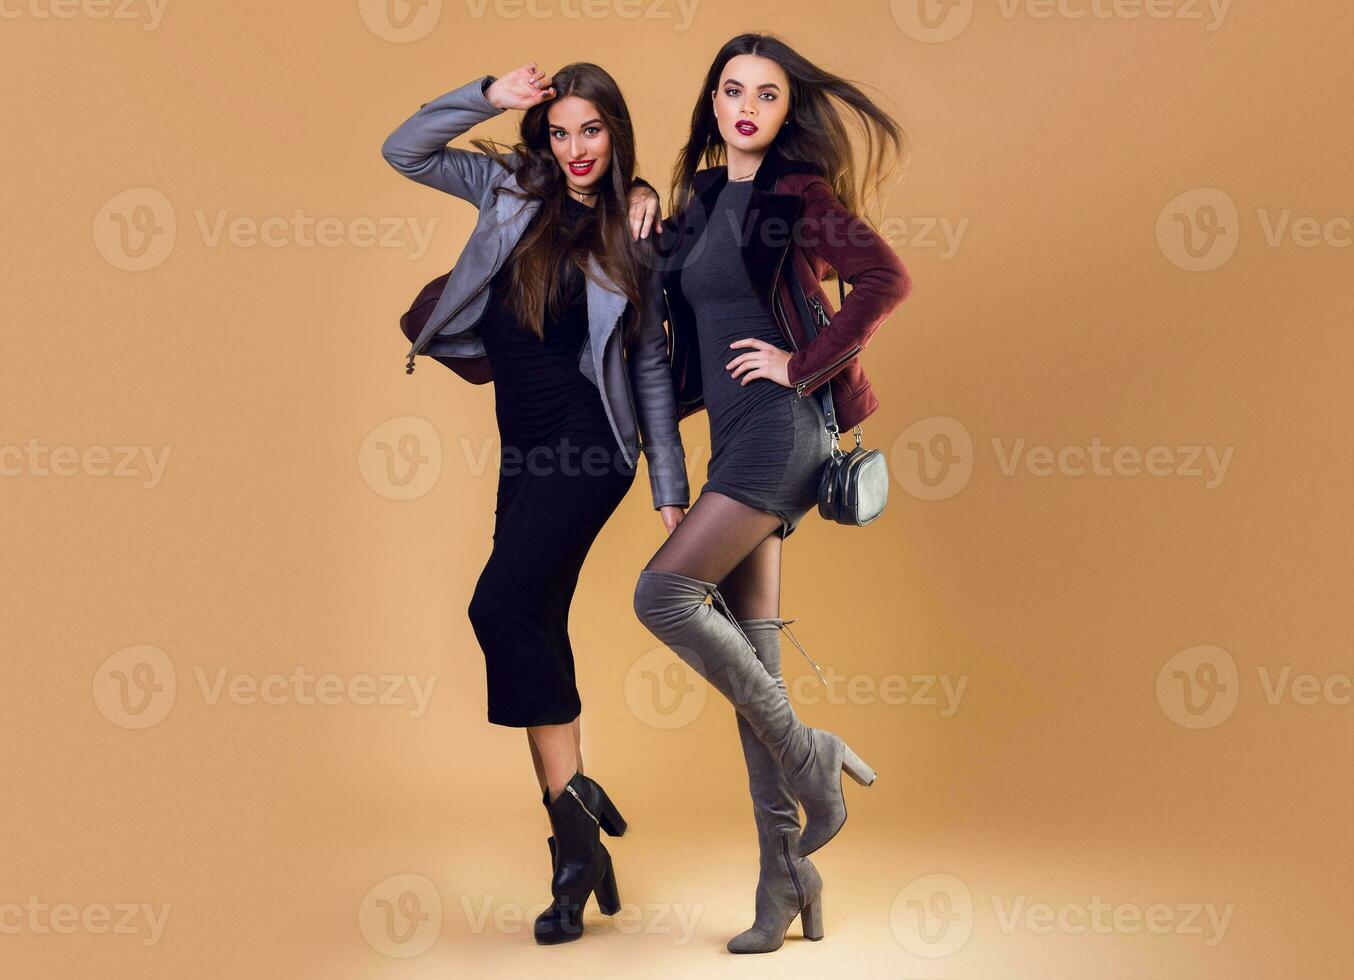 Glamorous  pretty two girls posing over beige   background ,  wearing casual winter jacket and dress. high heels.  Windy hairstyle. Full length image. photo